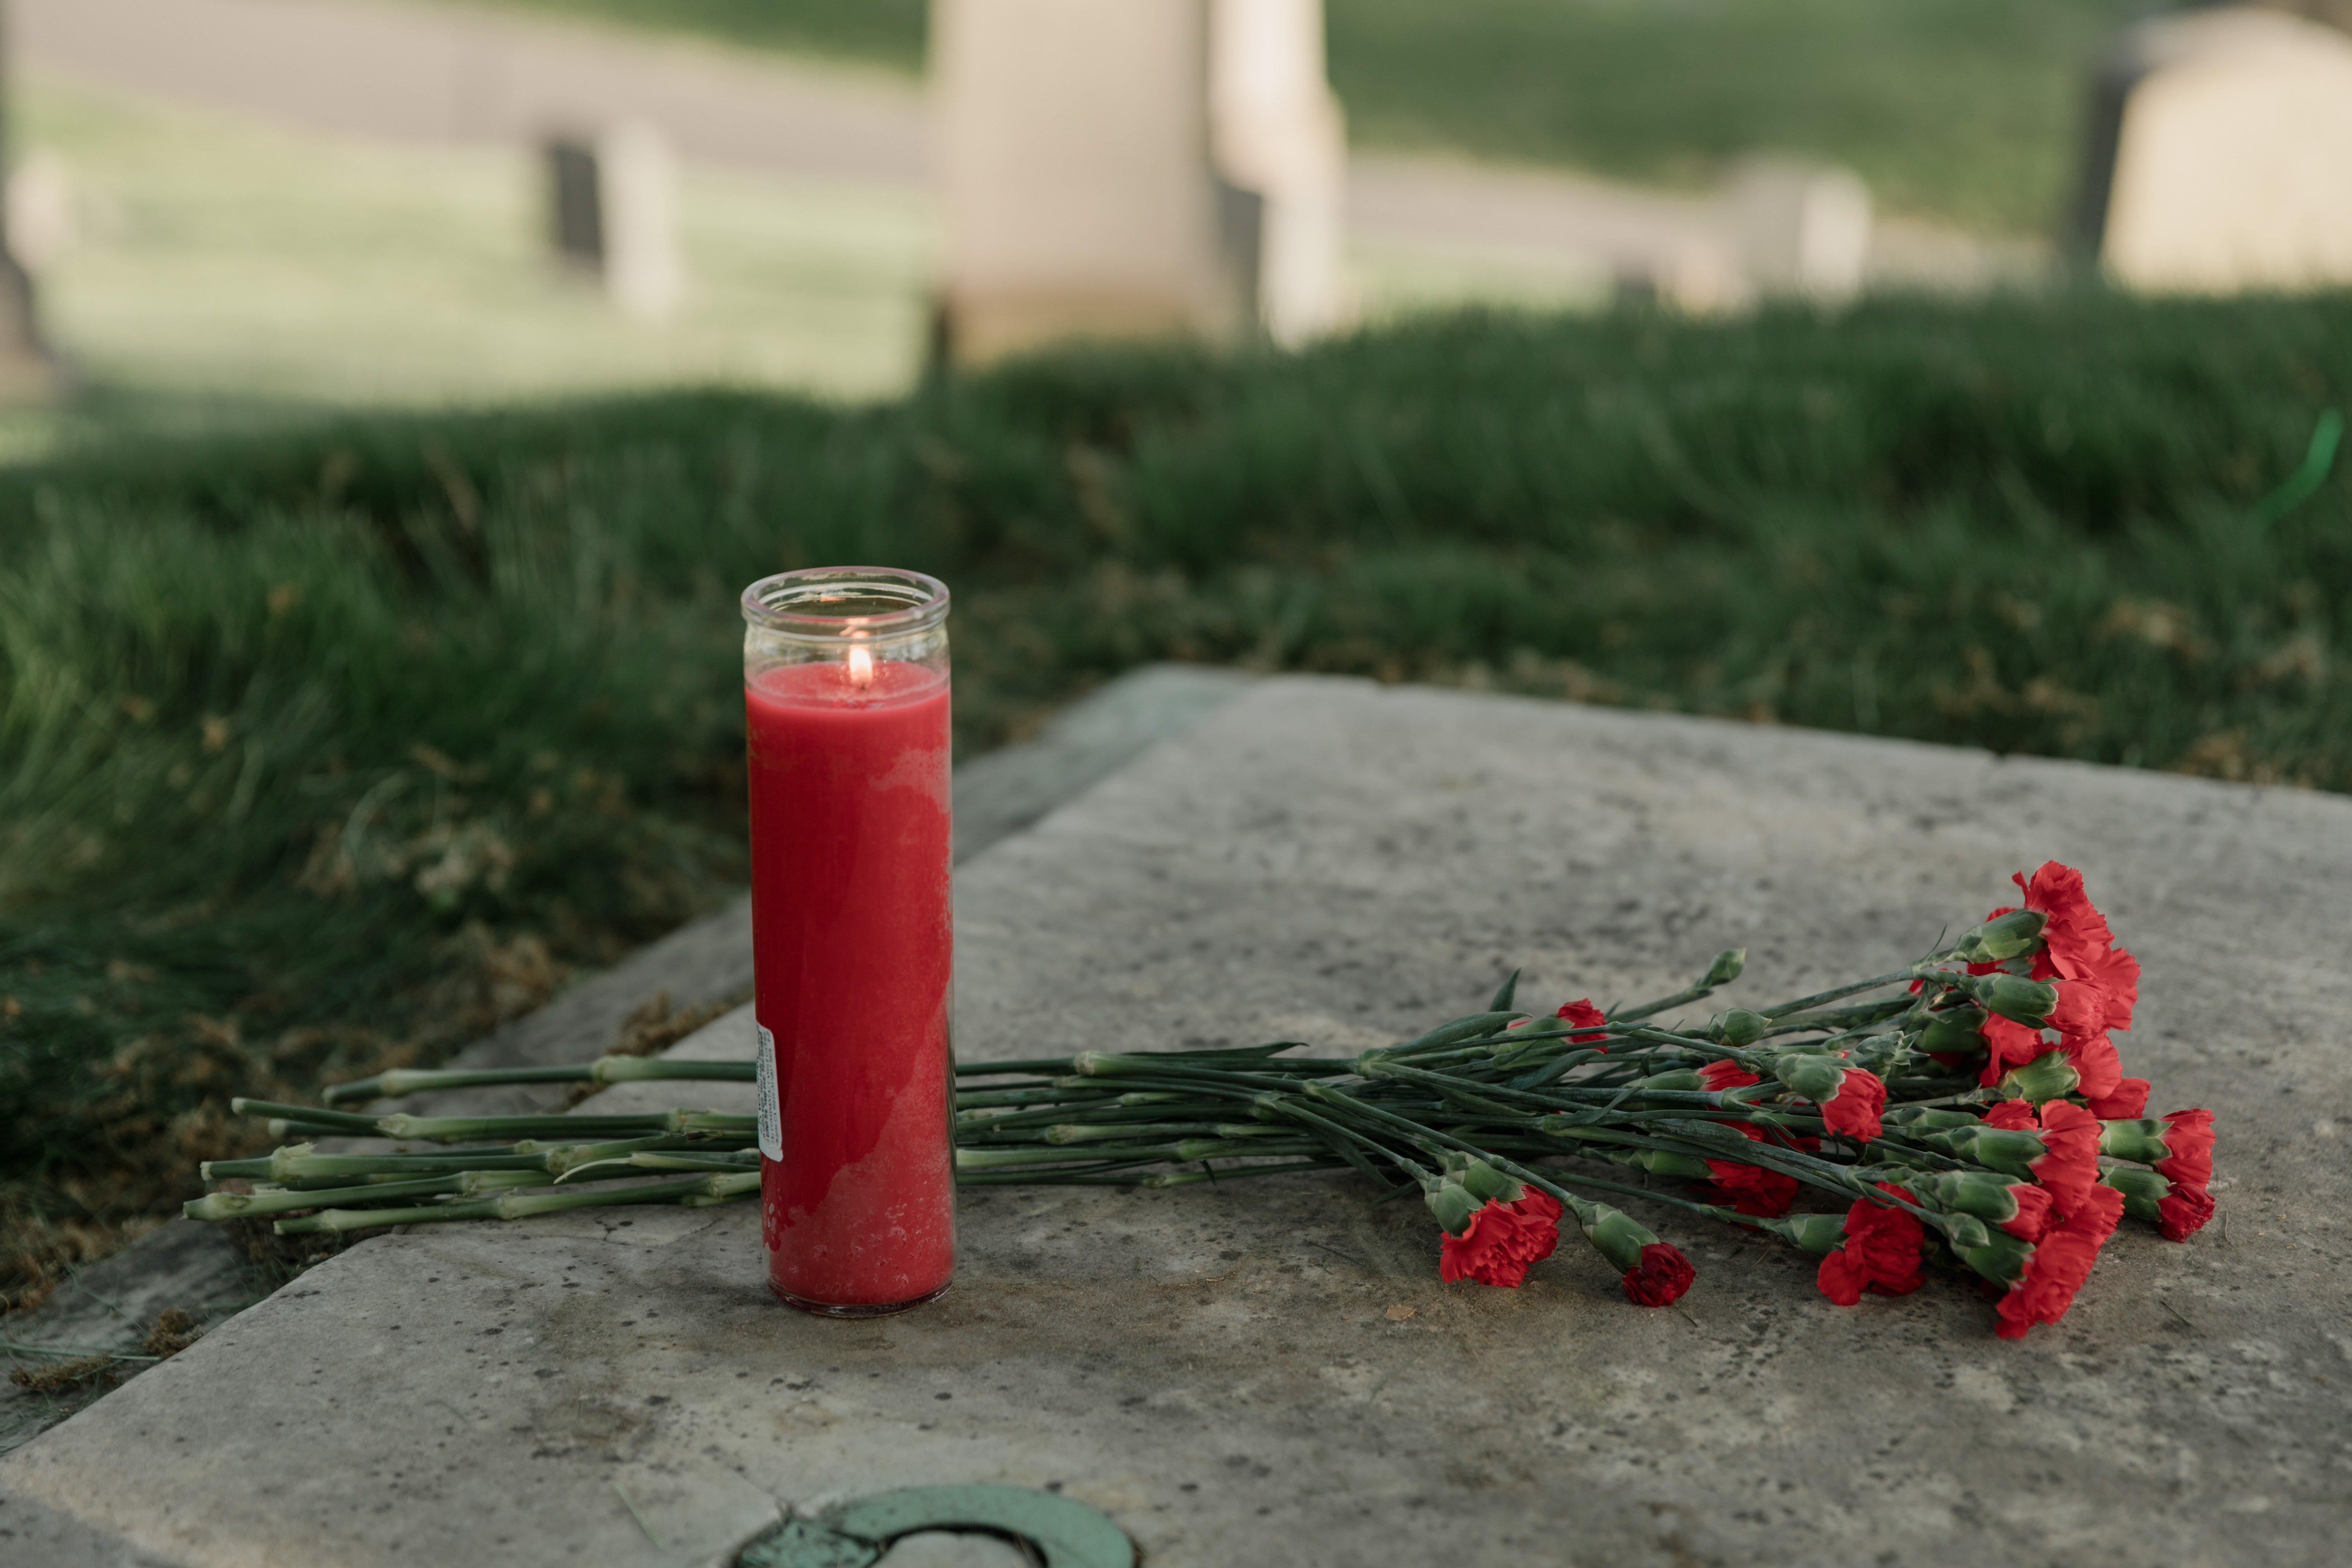 In celebration of his late mother's birthday, Ted went to the cemetery to visit her grave and pay his respects | Source: Pexels